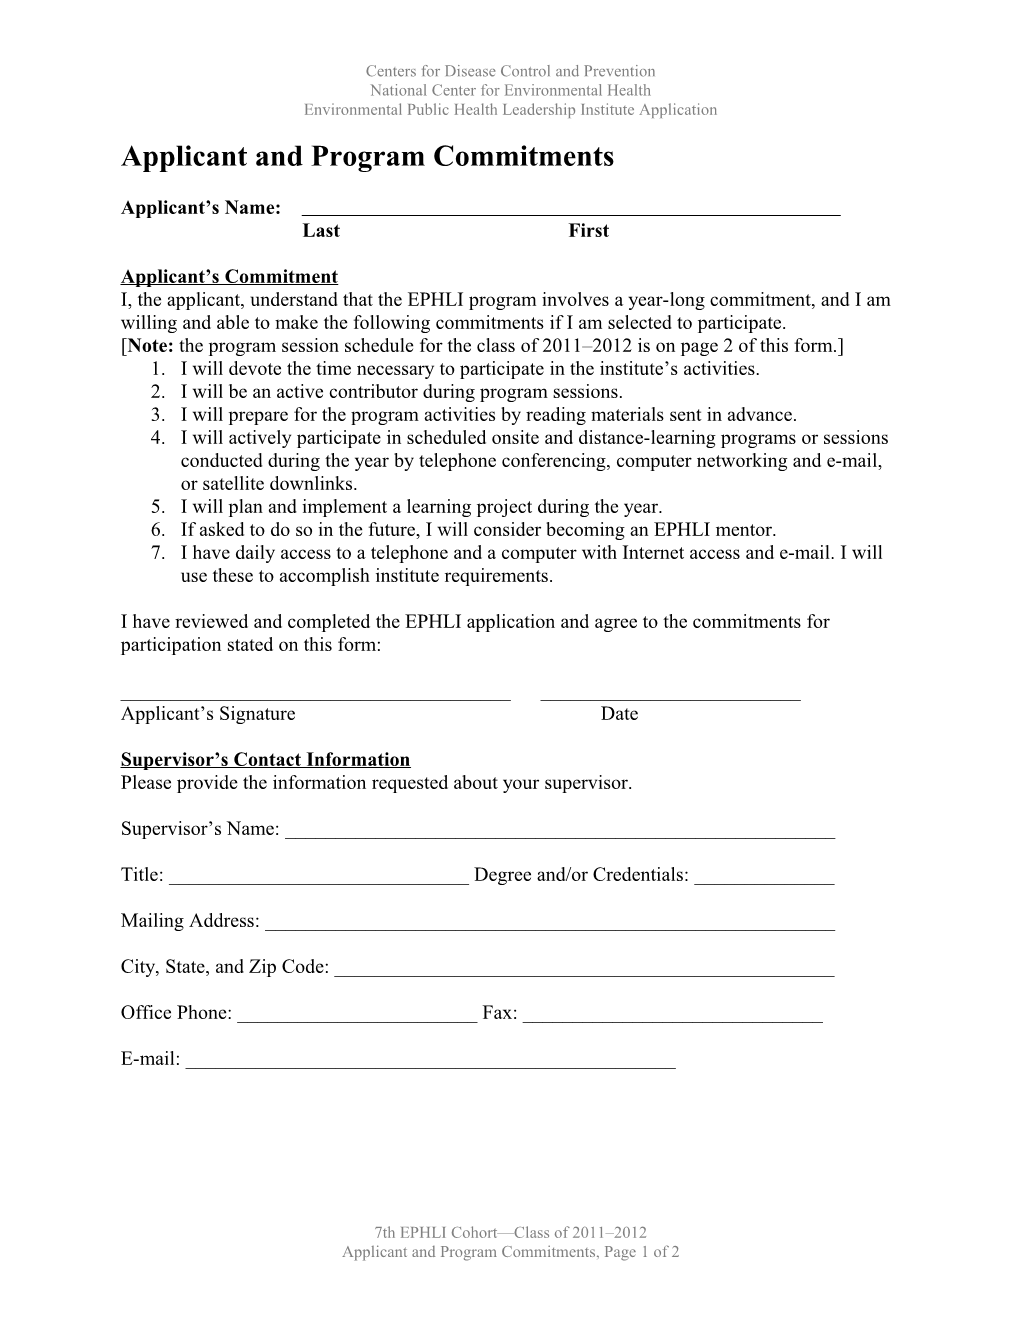 EPHLI Applicant And Program Commitments